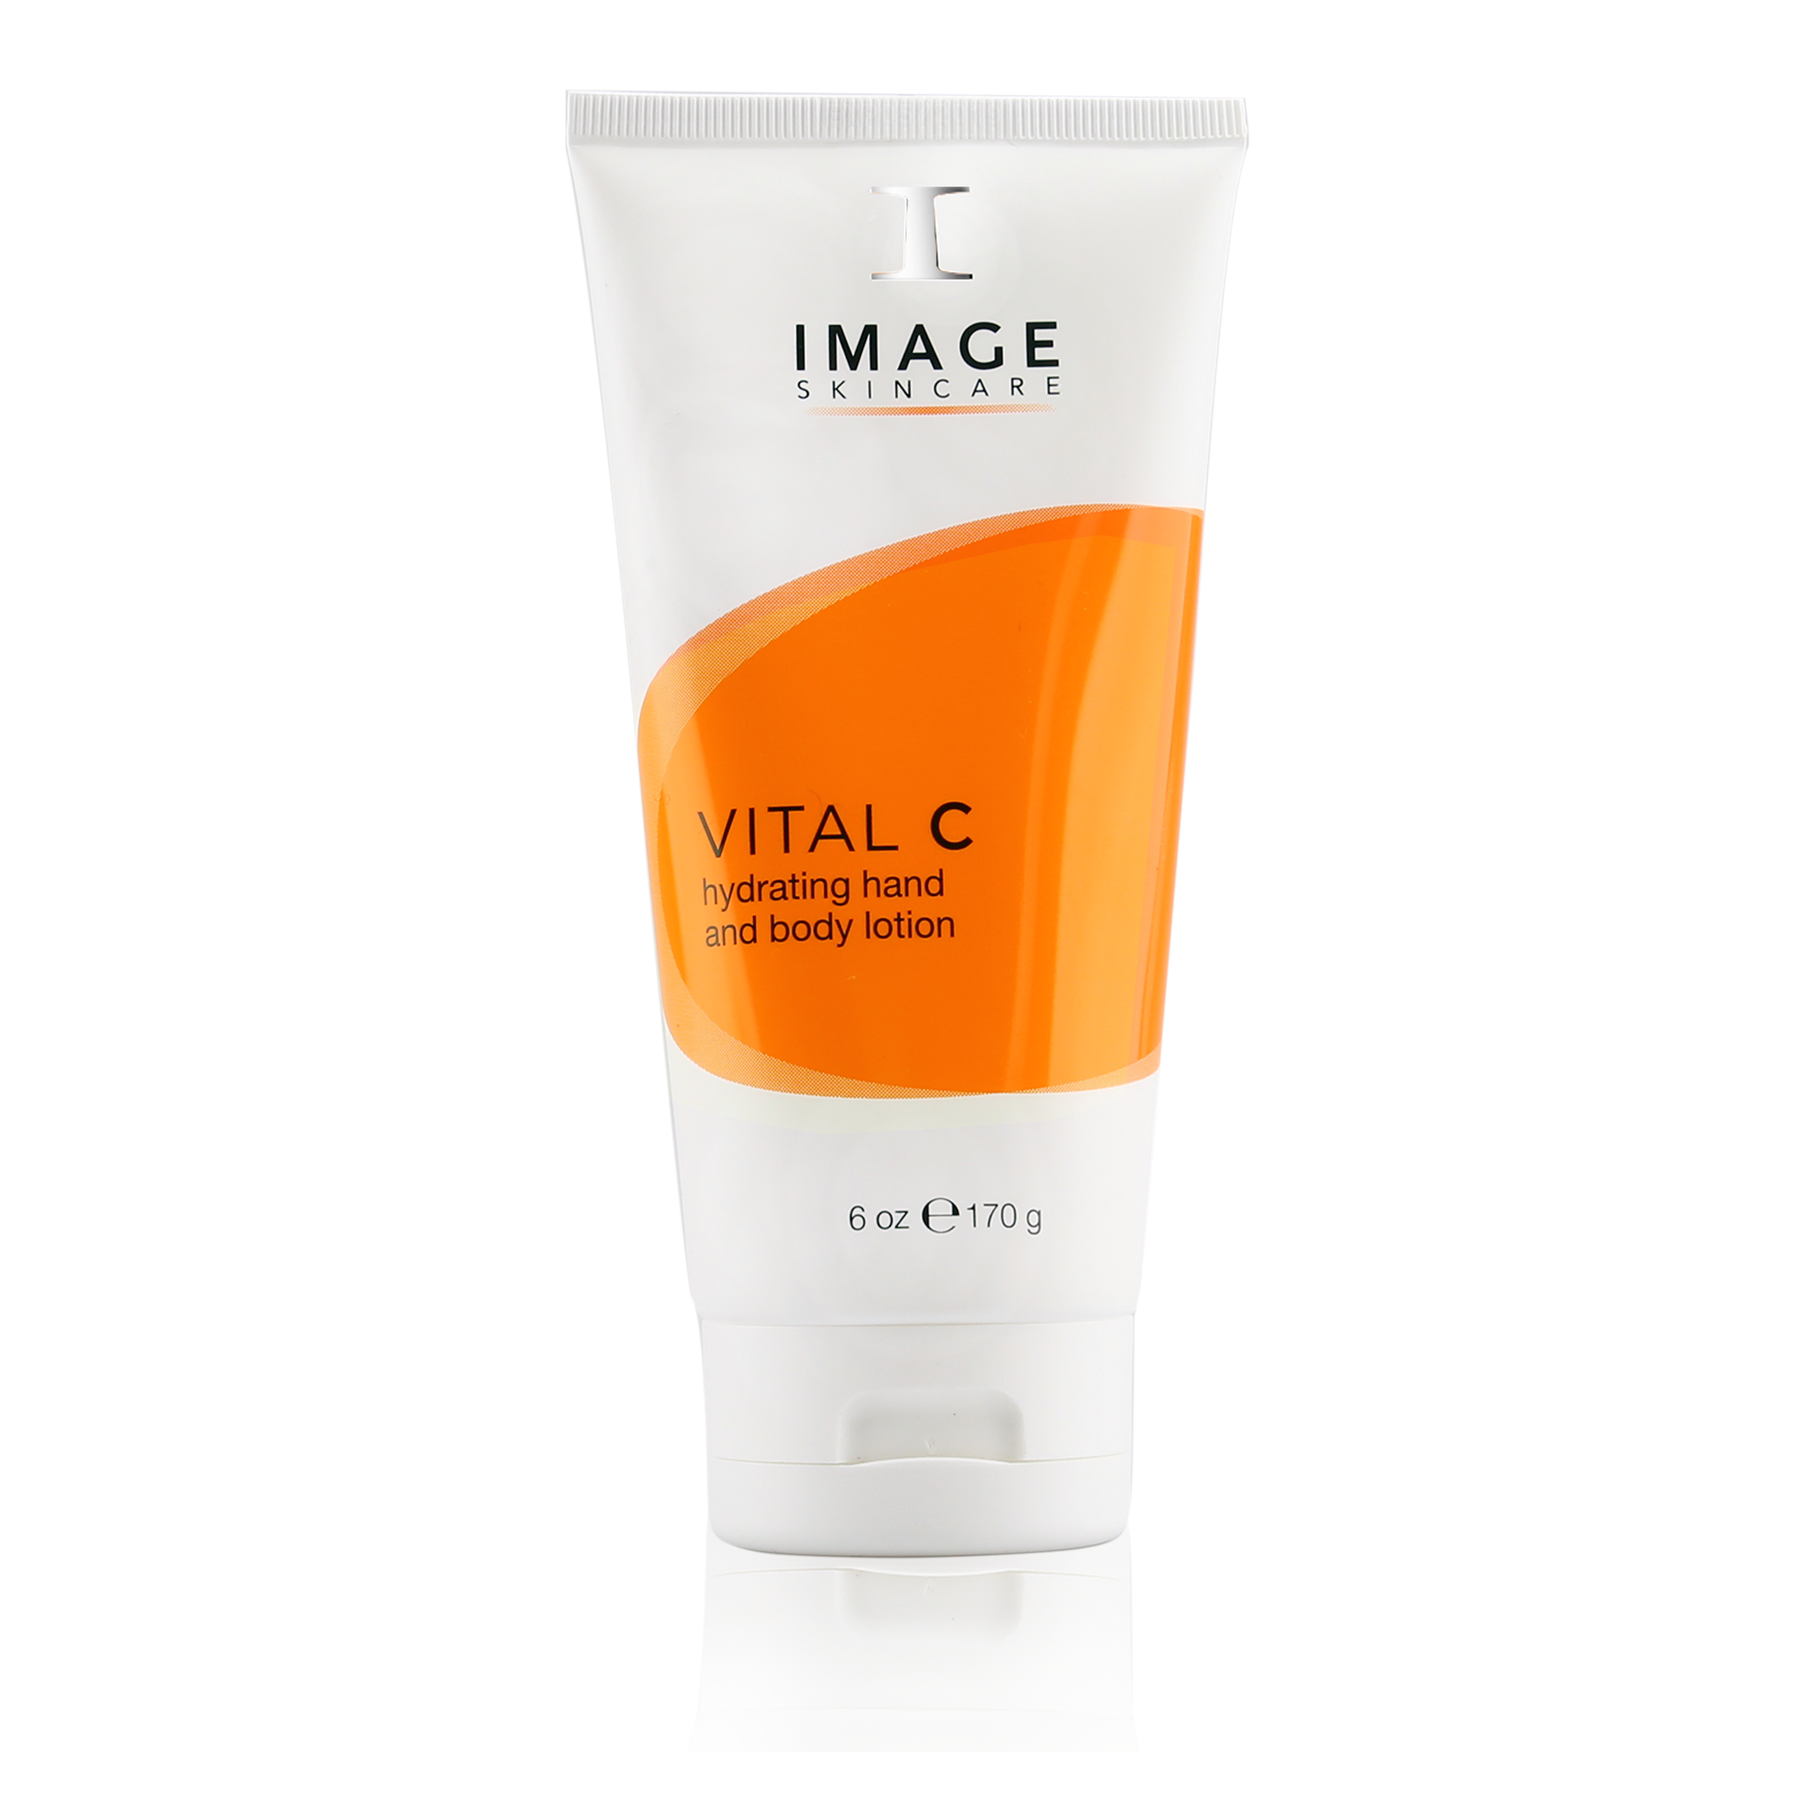 Vital C - Hydrating hand and body lotion